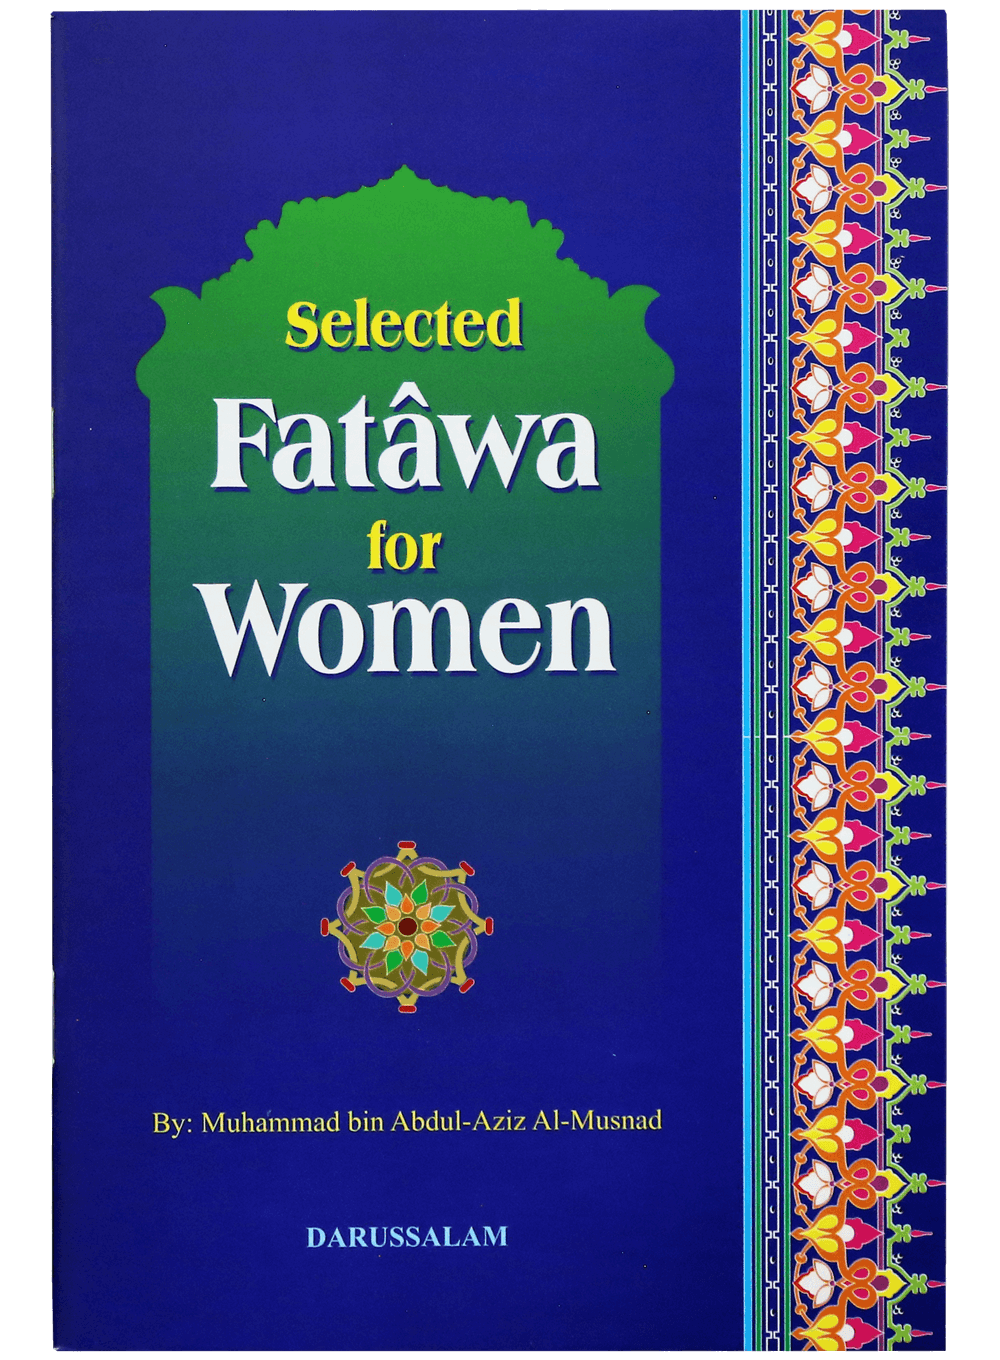 islamic-teachings-for-women-6-books-by-d-darussalam-20180531-112344